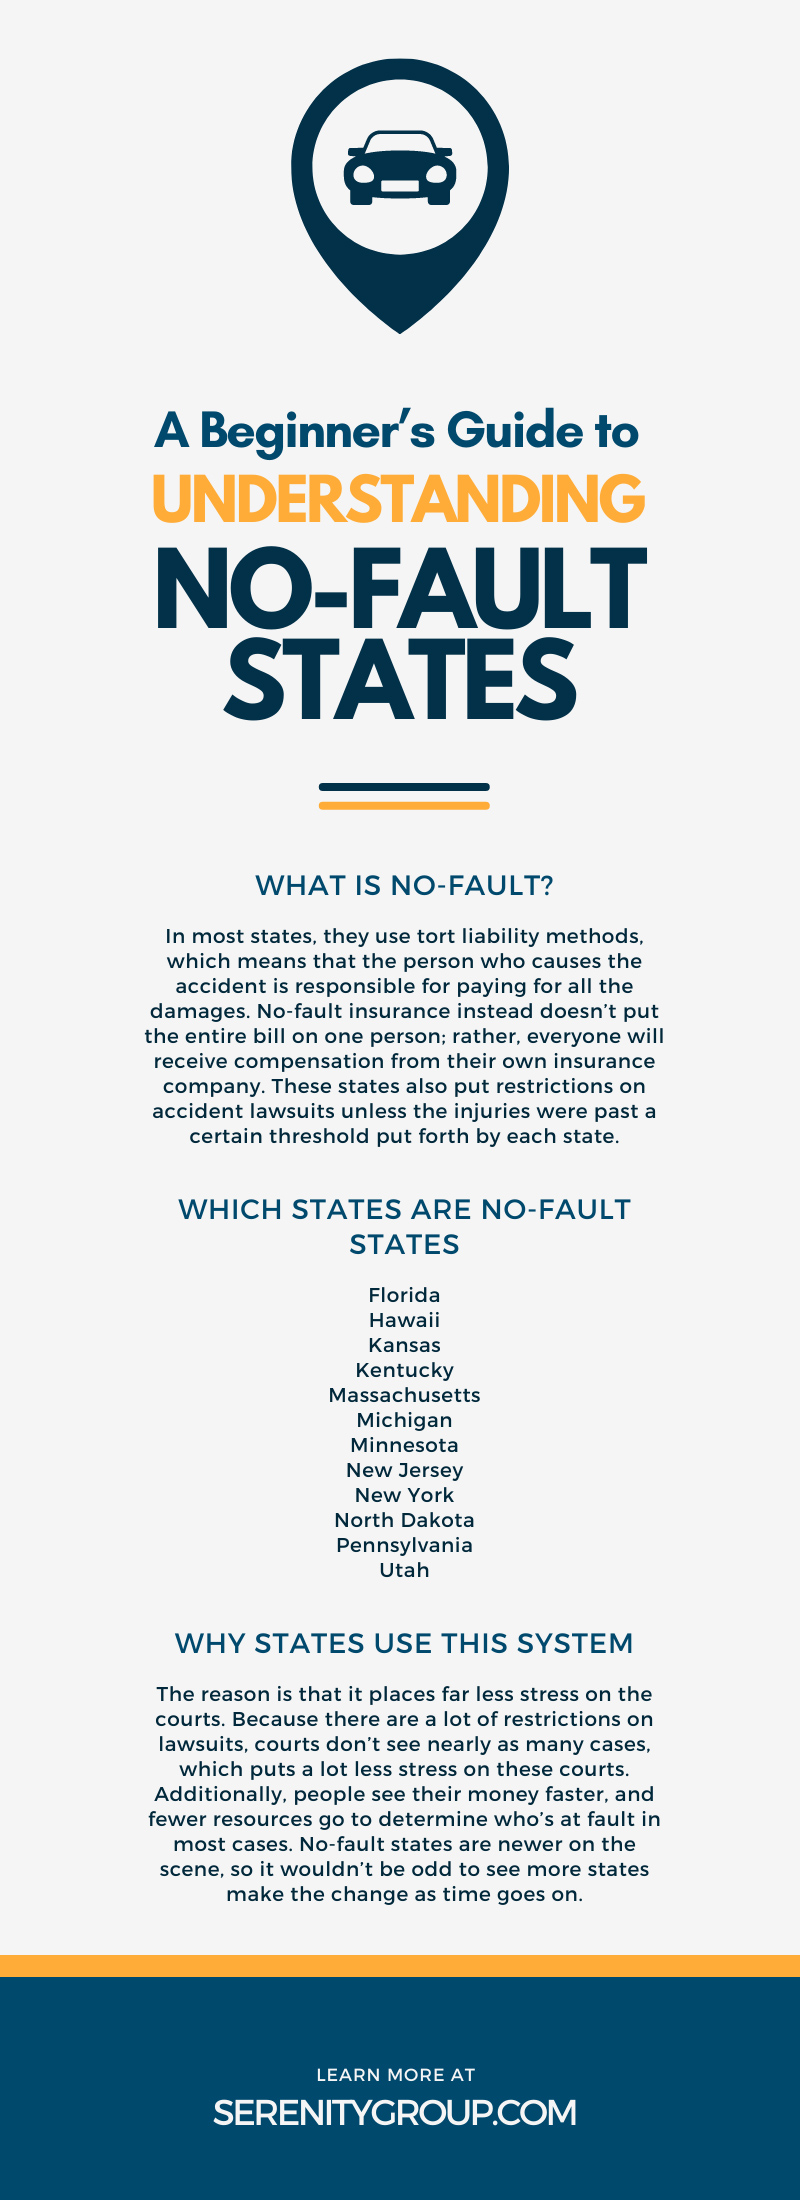 A Beginner’s Guide to Understanding No-Fault States